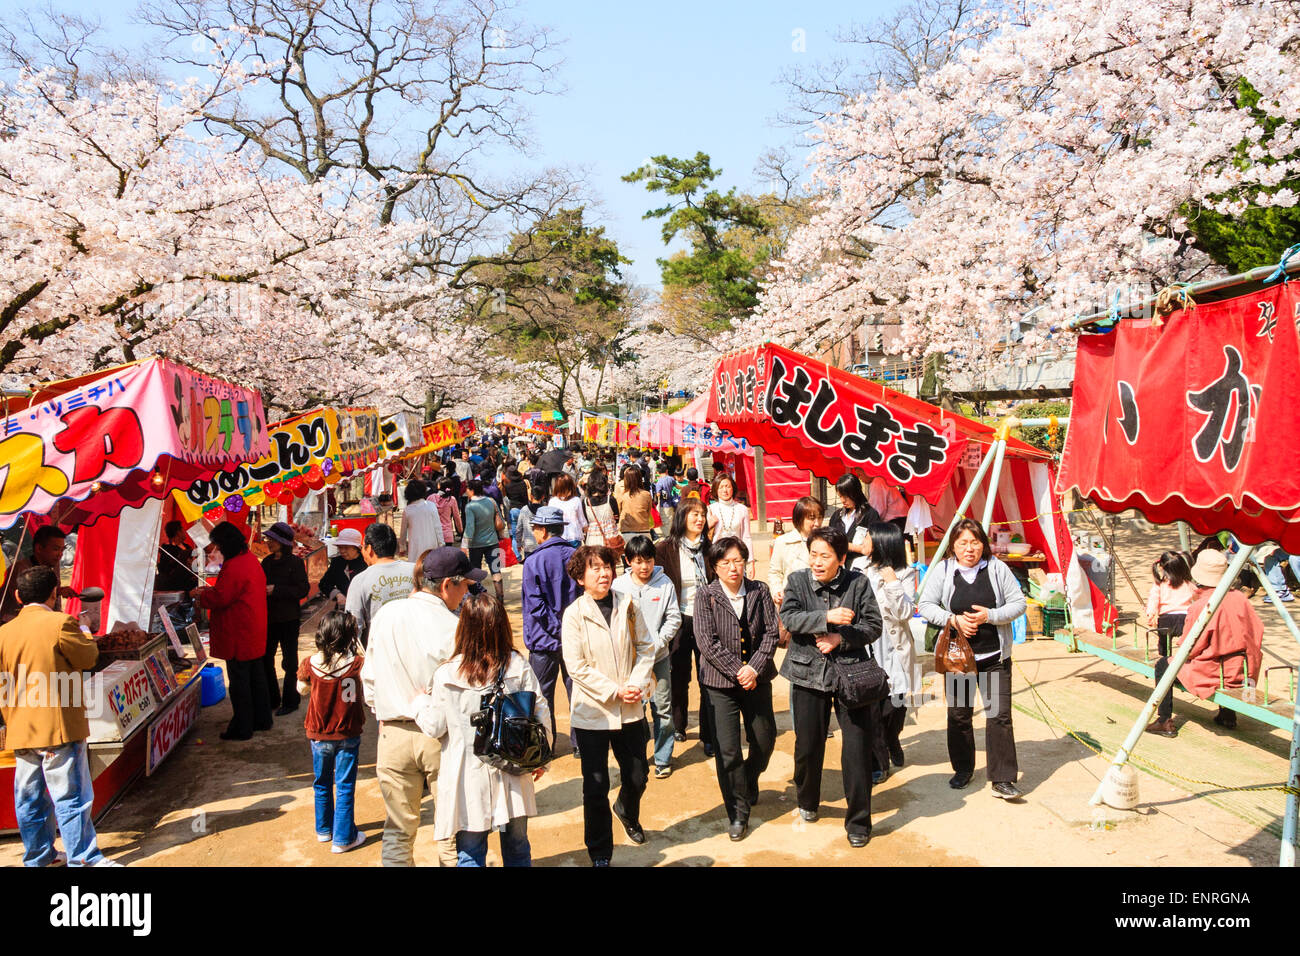 Crowds of people walking along the river bank between two rows of food and games stalls under the springtime cherry blossom festival in Japan. Stock Photo